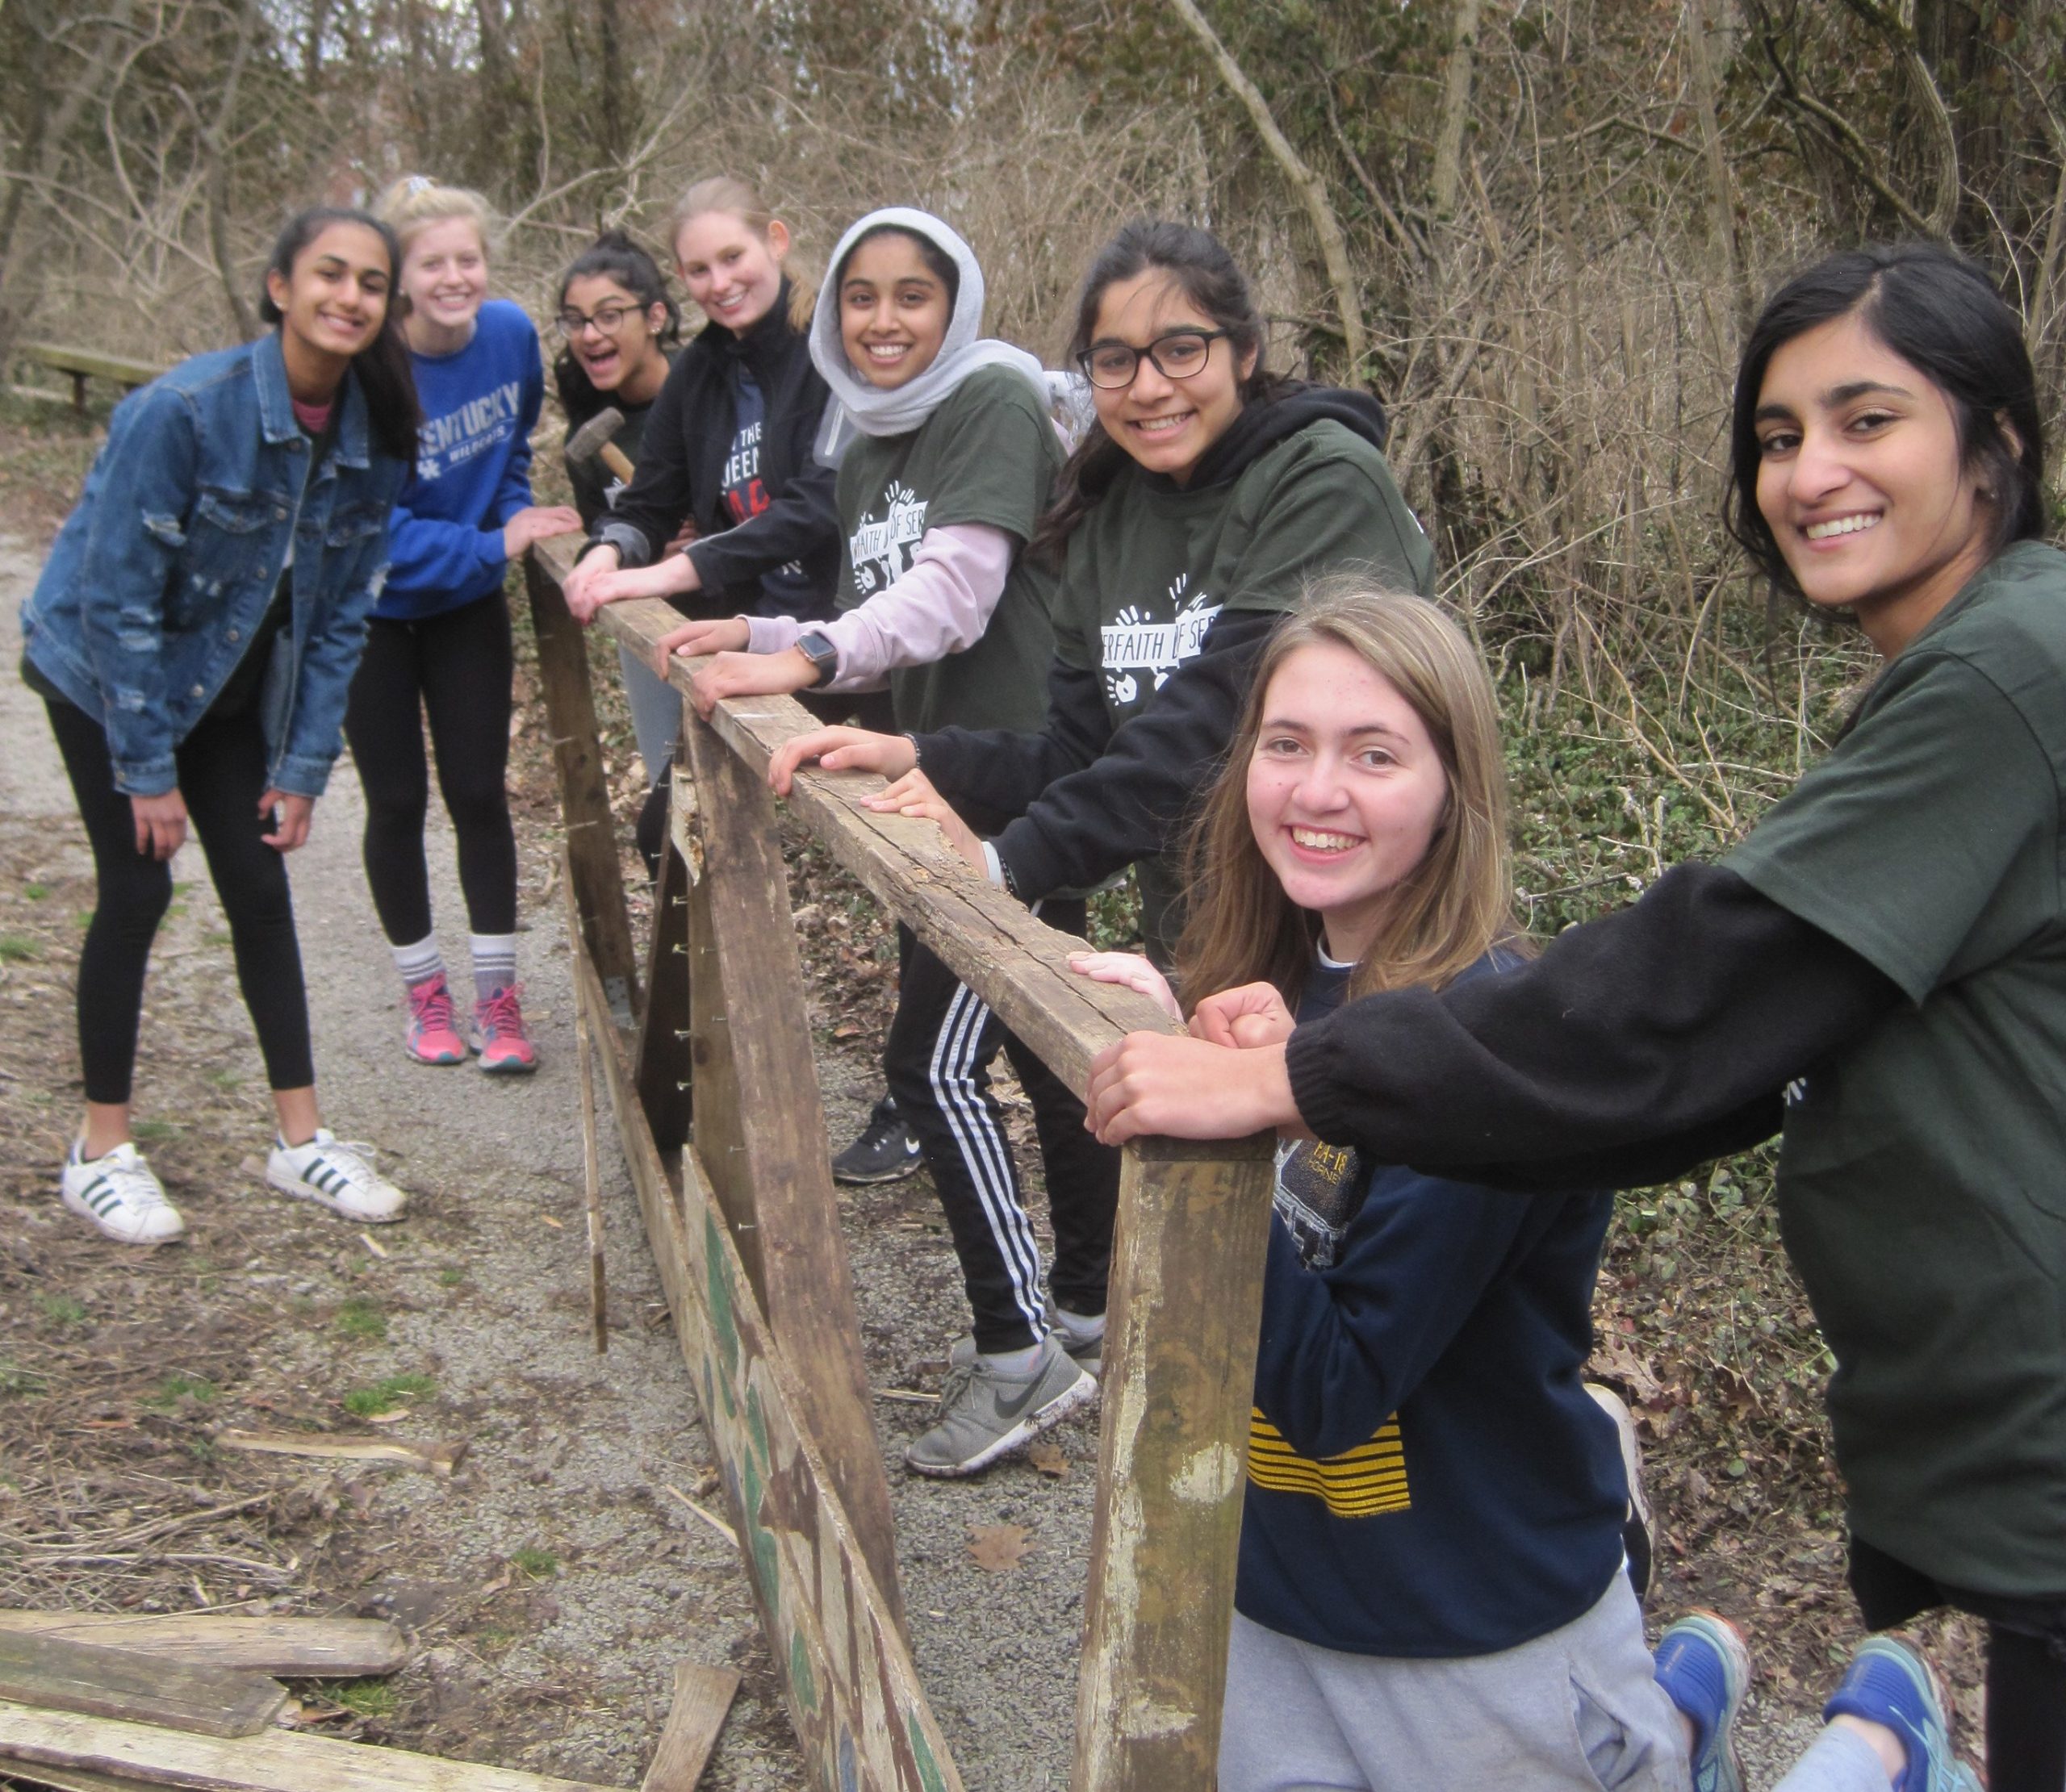 Students from the different schools stop their work improving the trails to pose for a photograph.